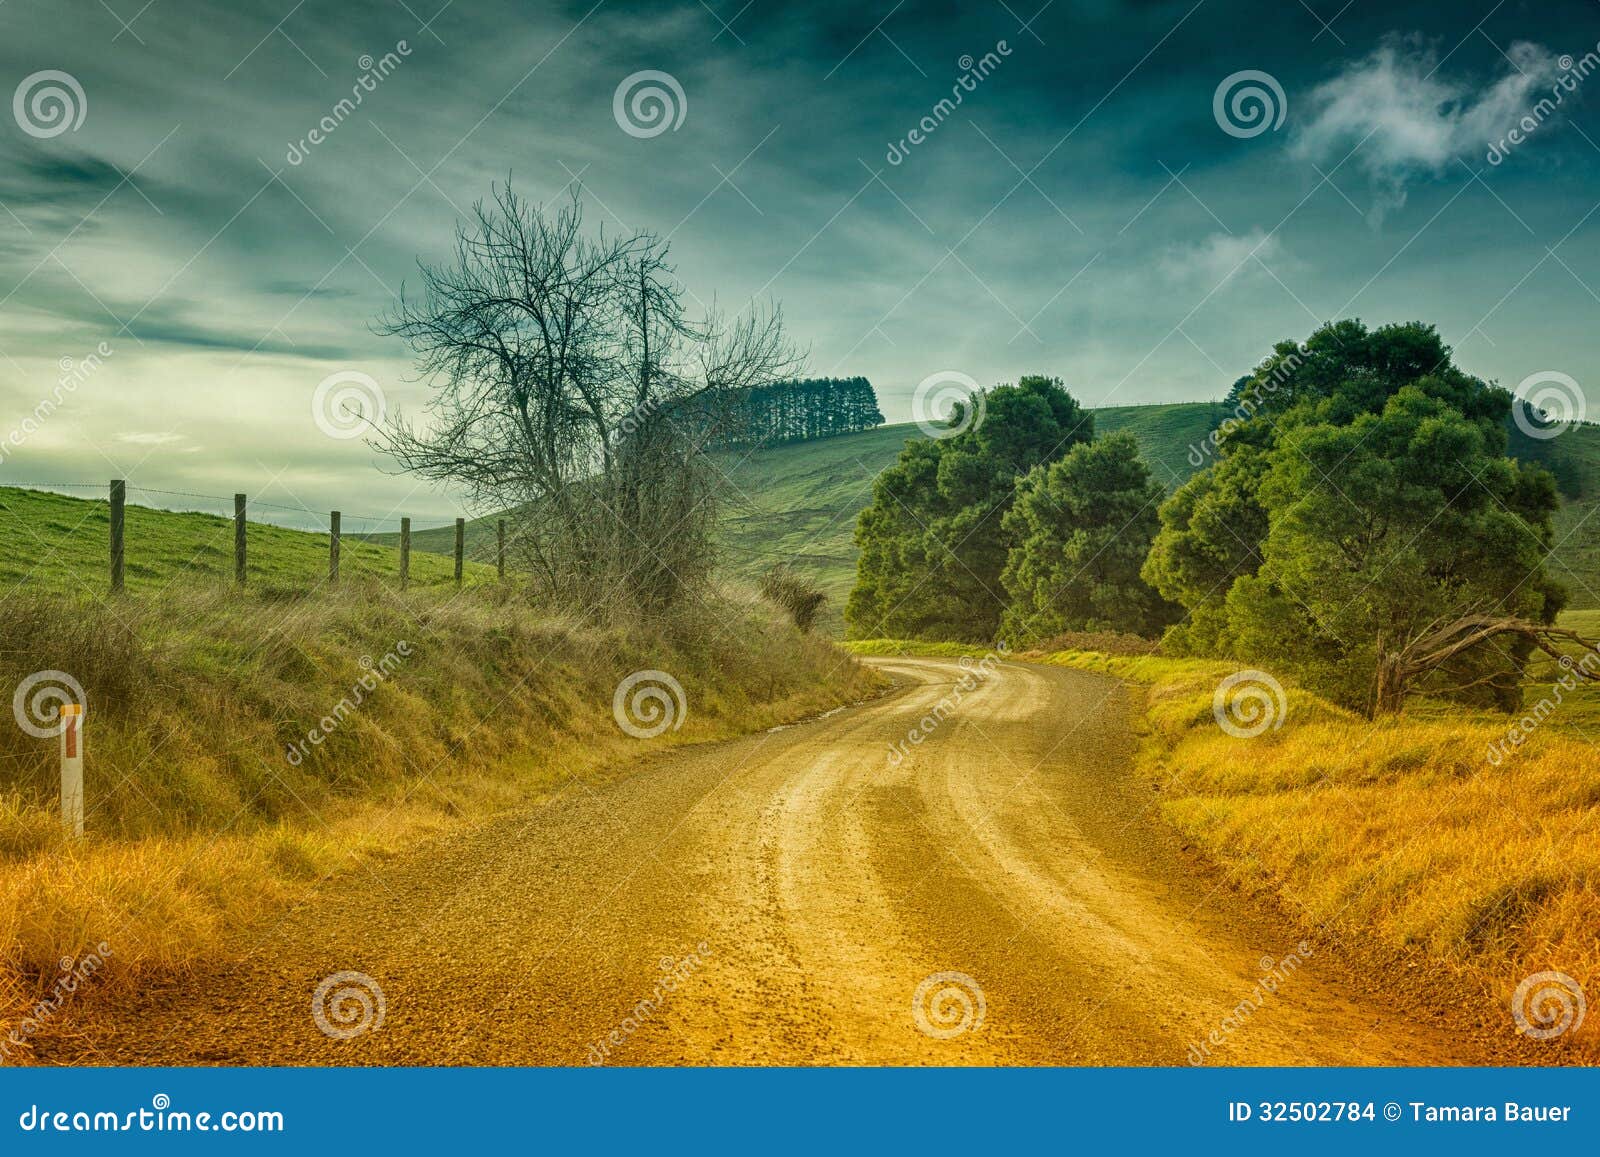 country road in australia